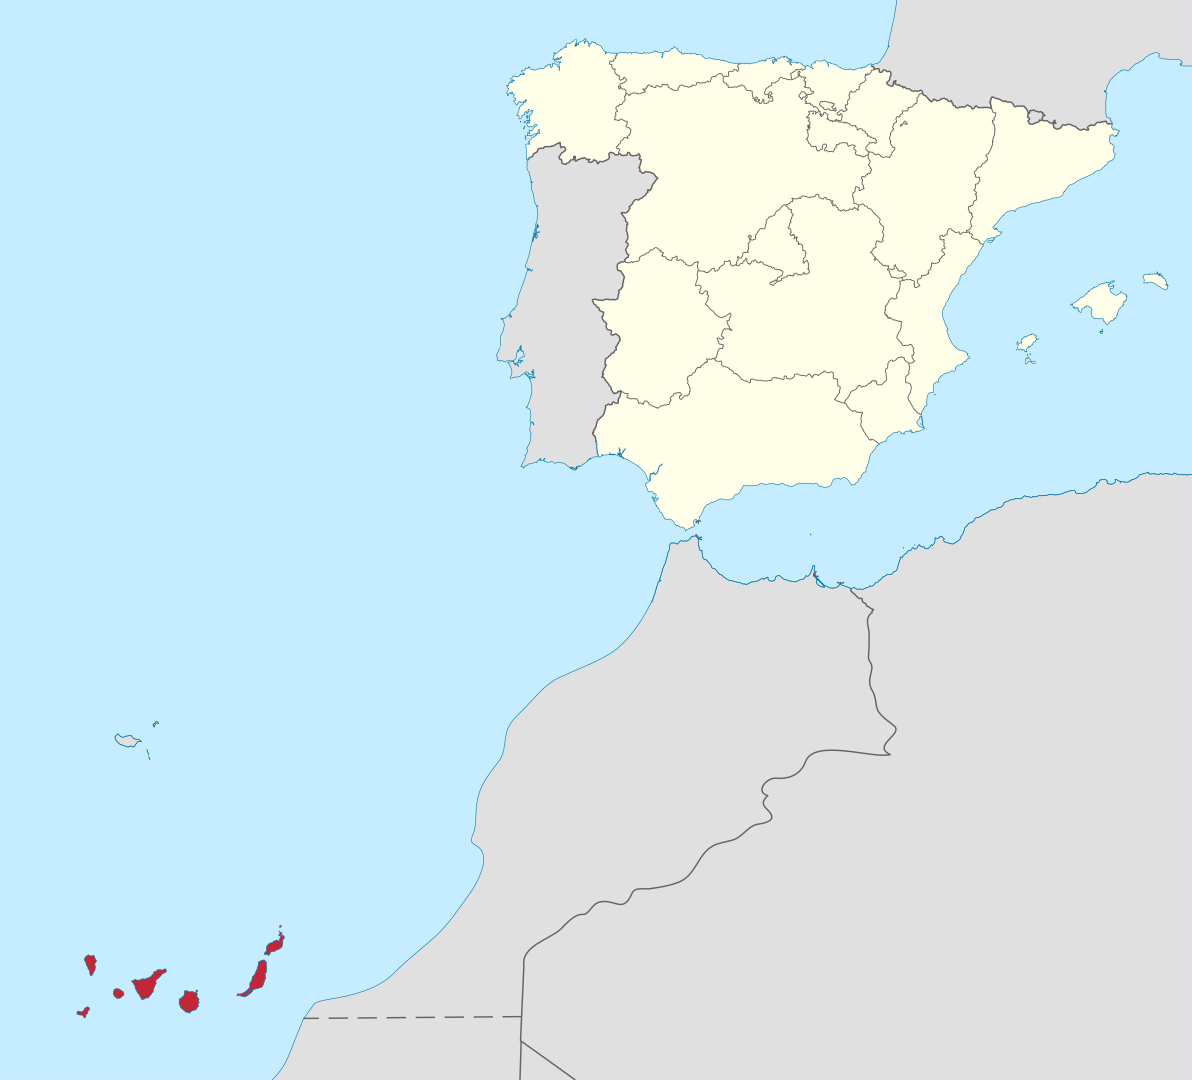 simple political digital map showing mainland Spain in relation to the Canary Islands